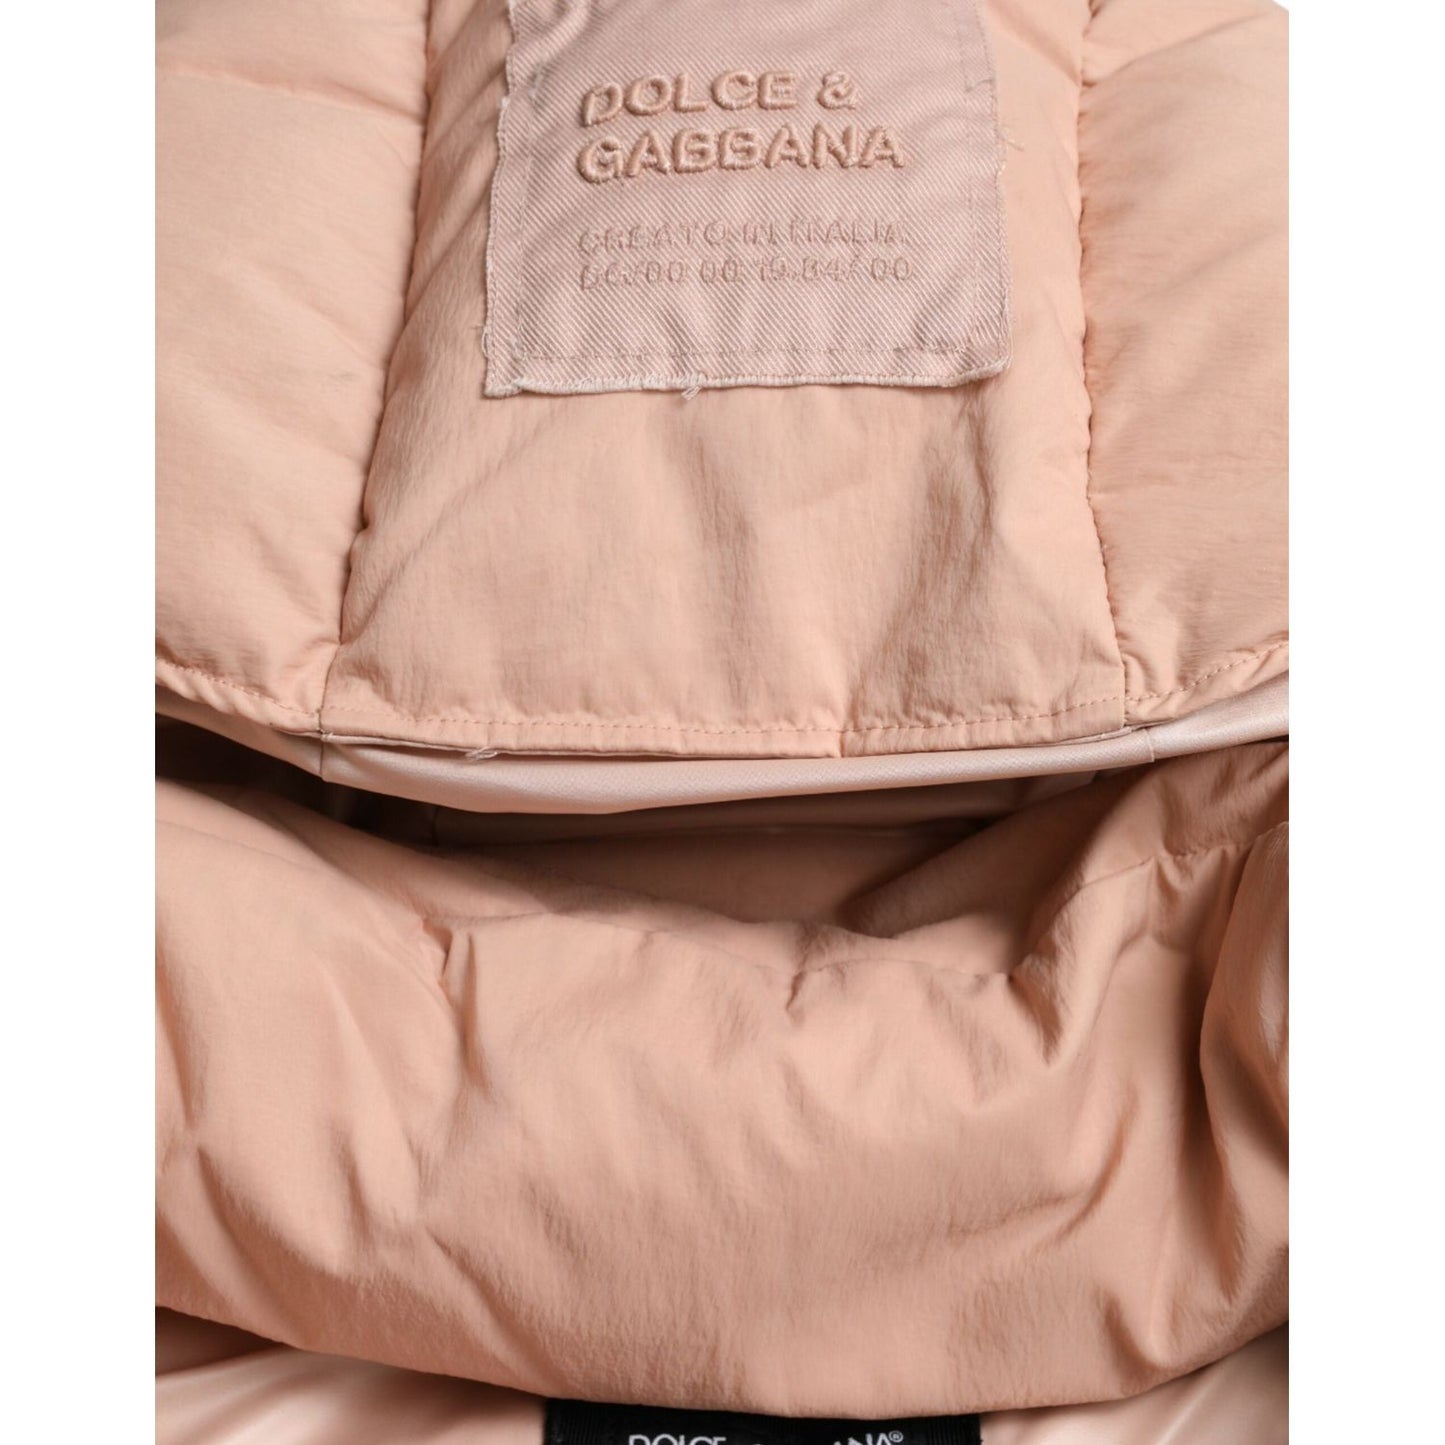 Dolce & Gabbana Chic Coral Hooded Puffer Jacket peach-polyester-hooded-puffer-winter-jacket